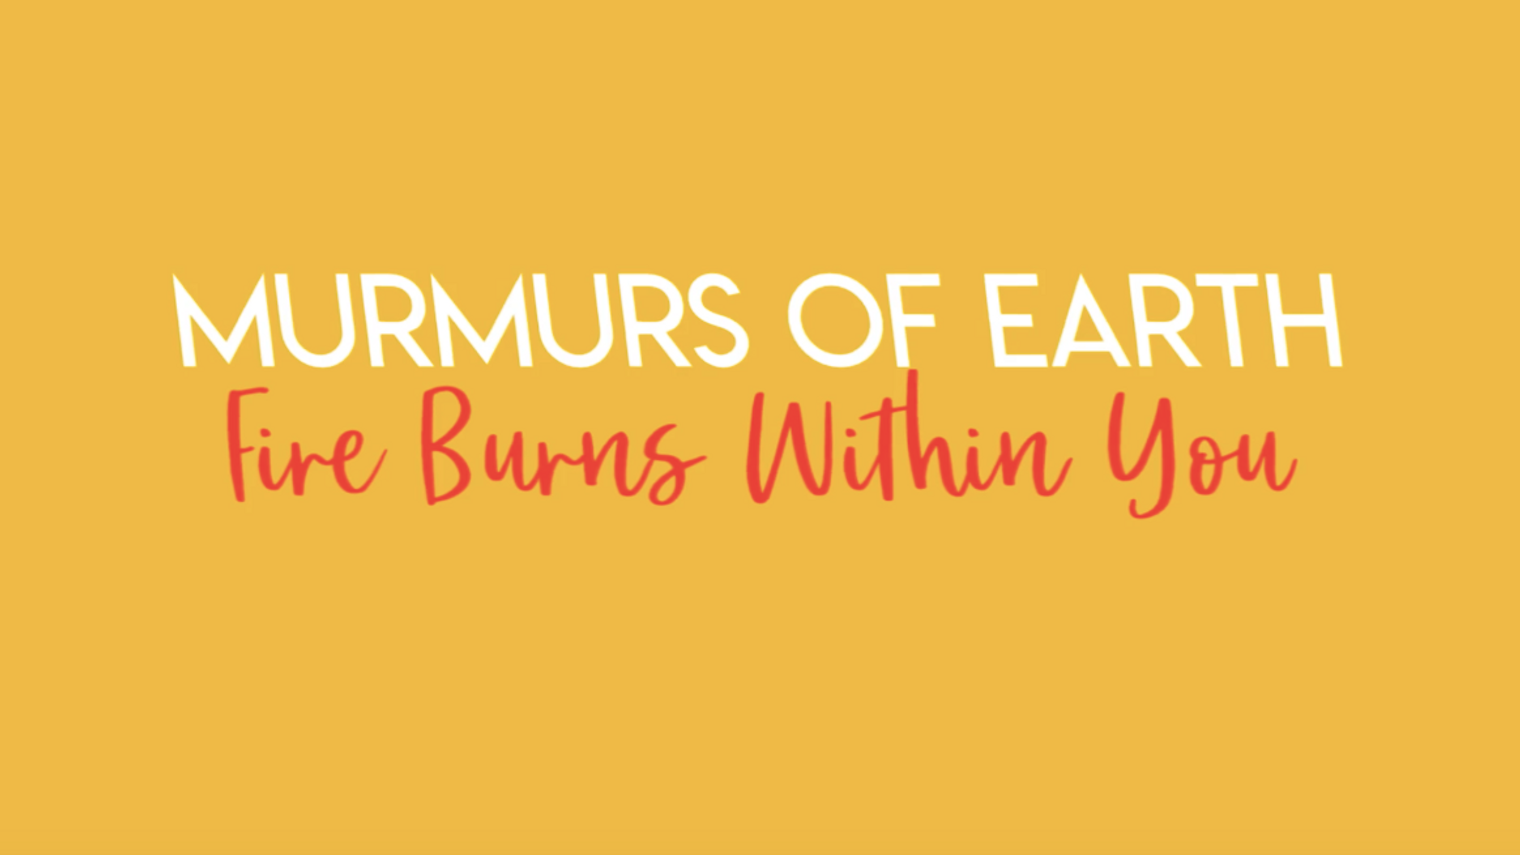 Fire Burns Within You